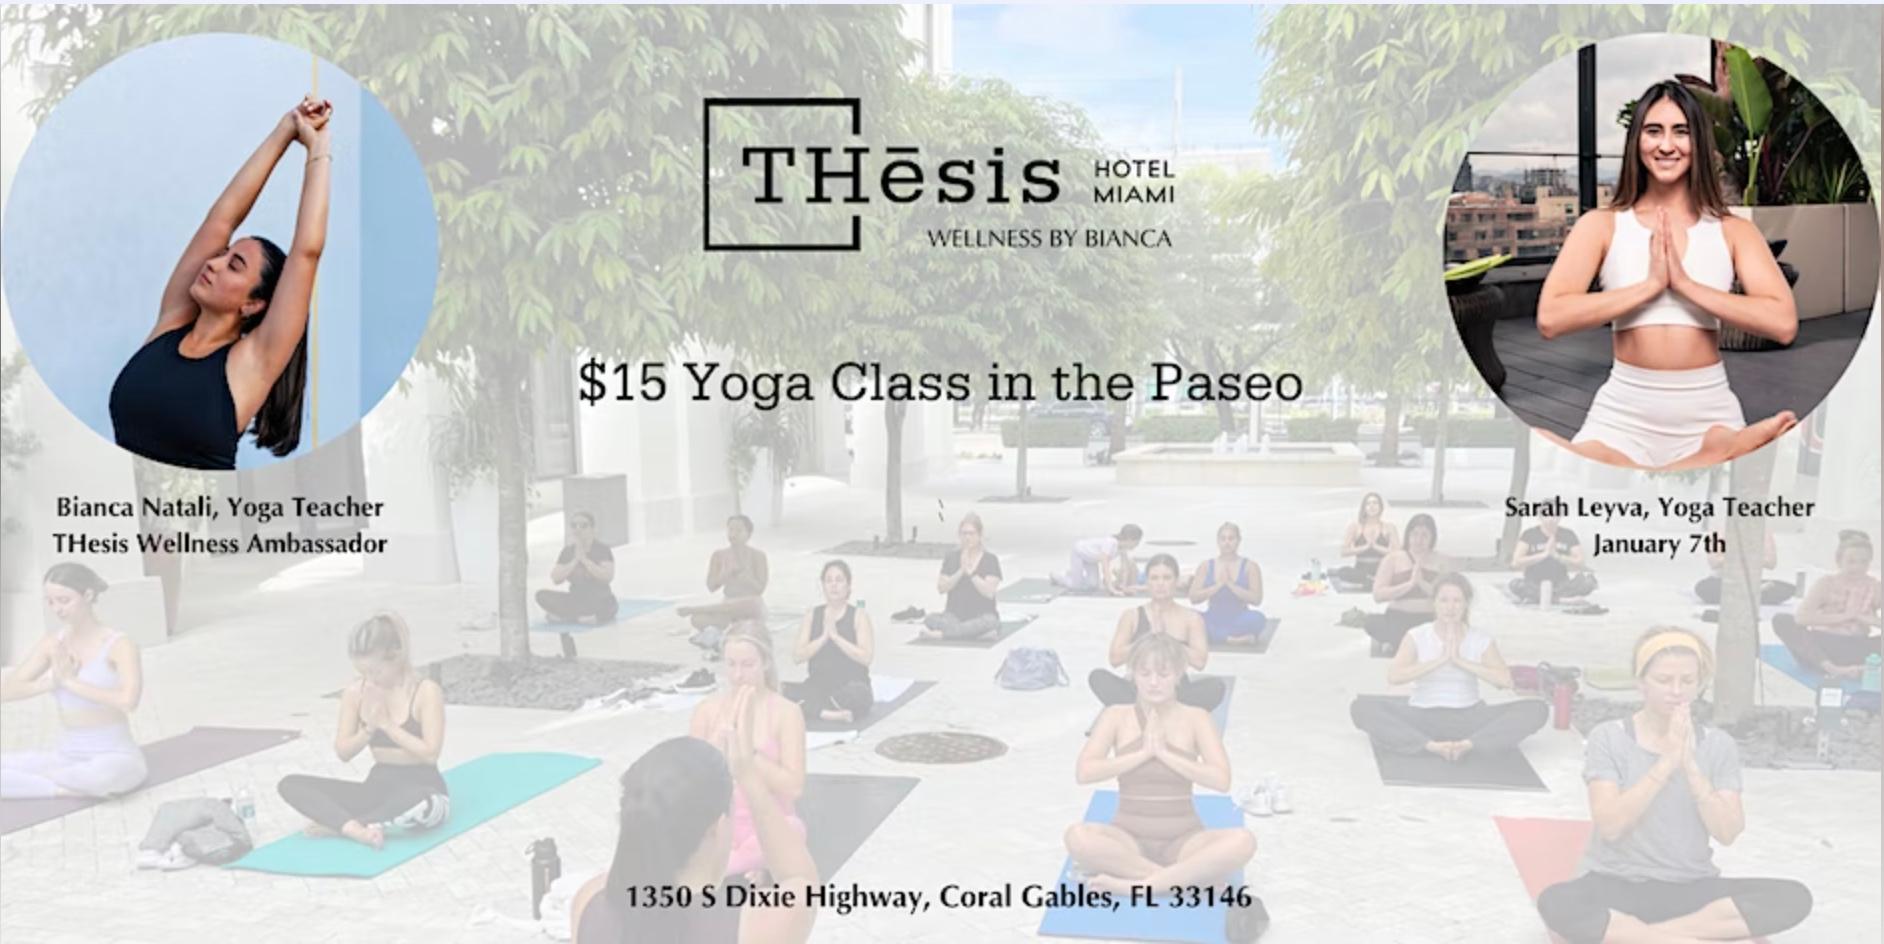 THesis Hotel X Wellness by Bianca Saturday Yoga Classes in the Paseo